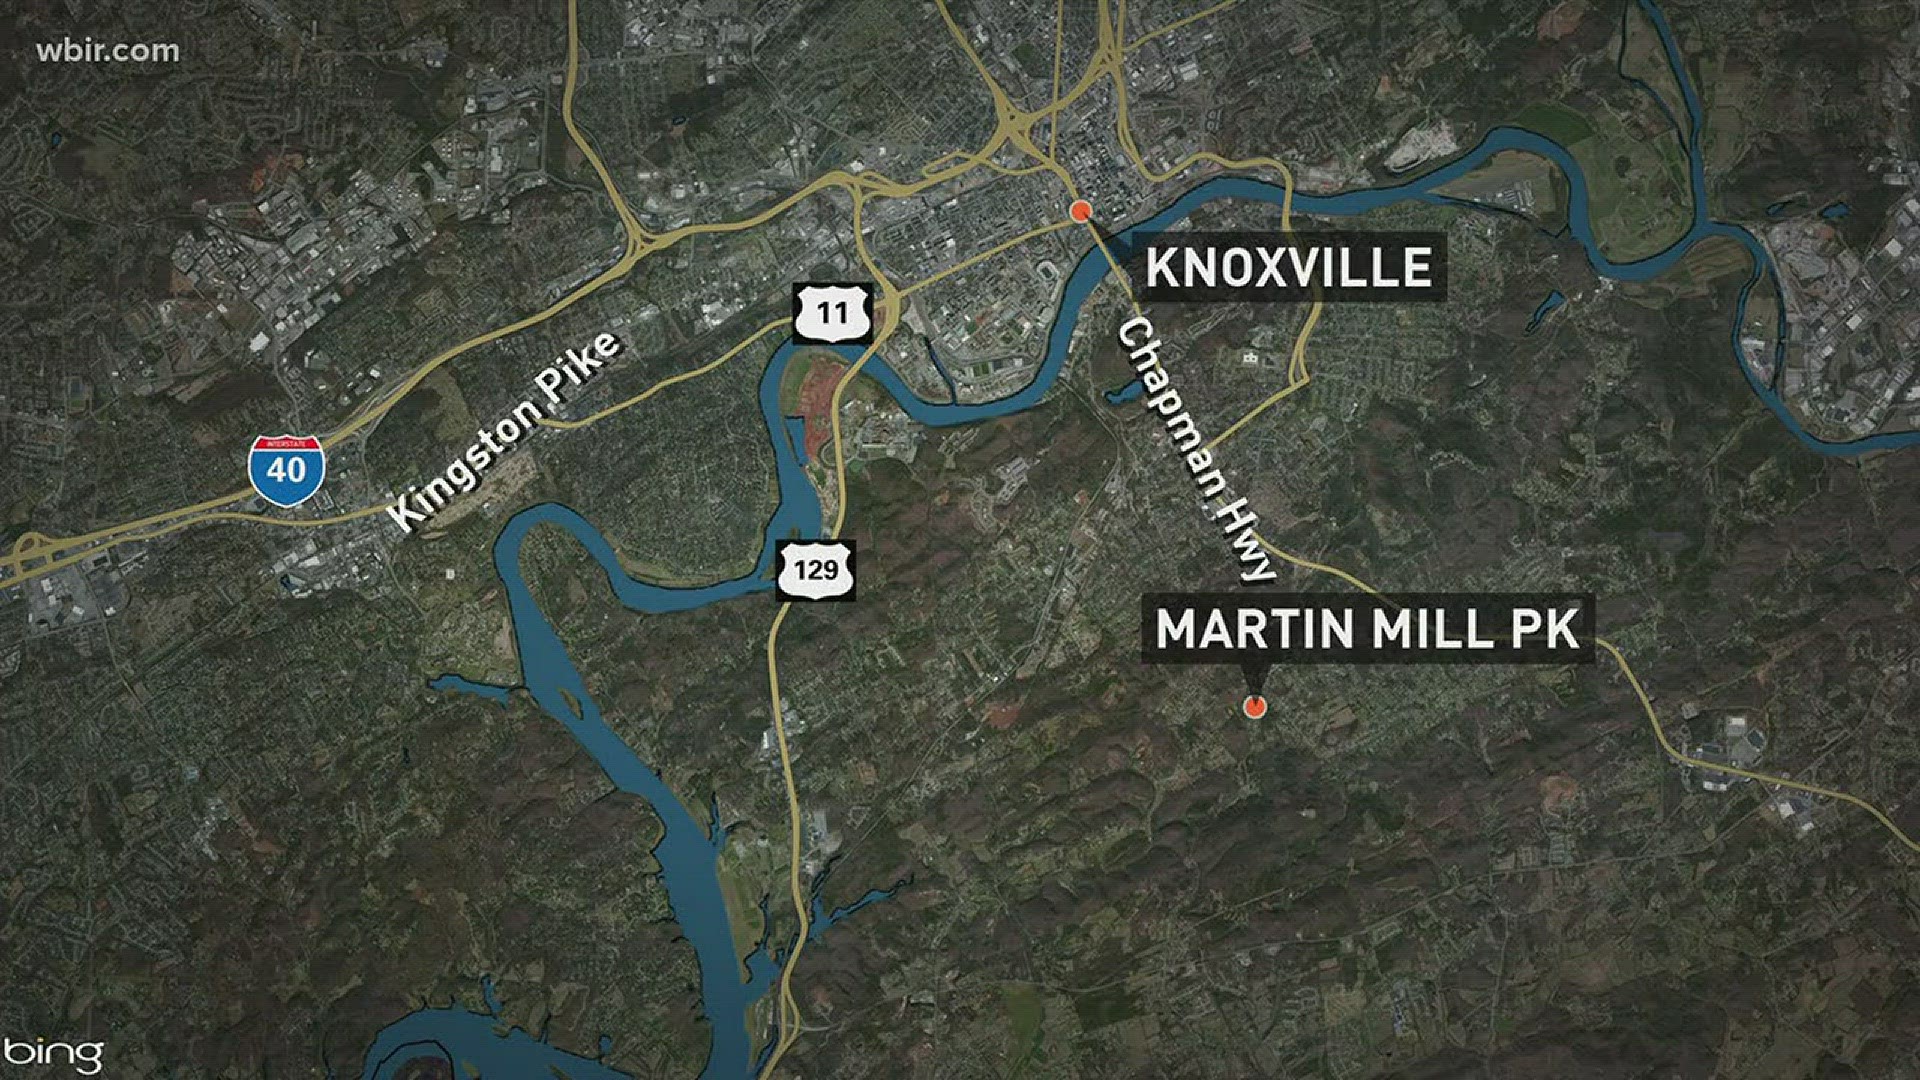 Police said they are investigating two crashes that happened over the weekend in Knoxville at Bridgewater Road and South Knoxville.